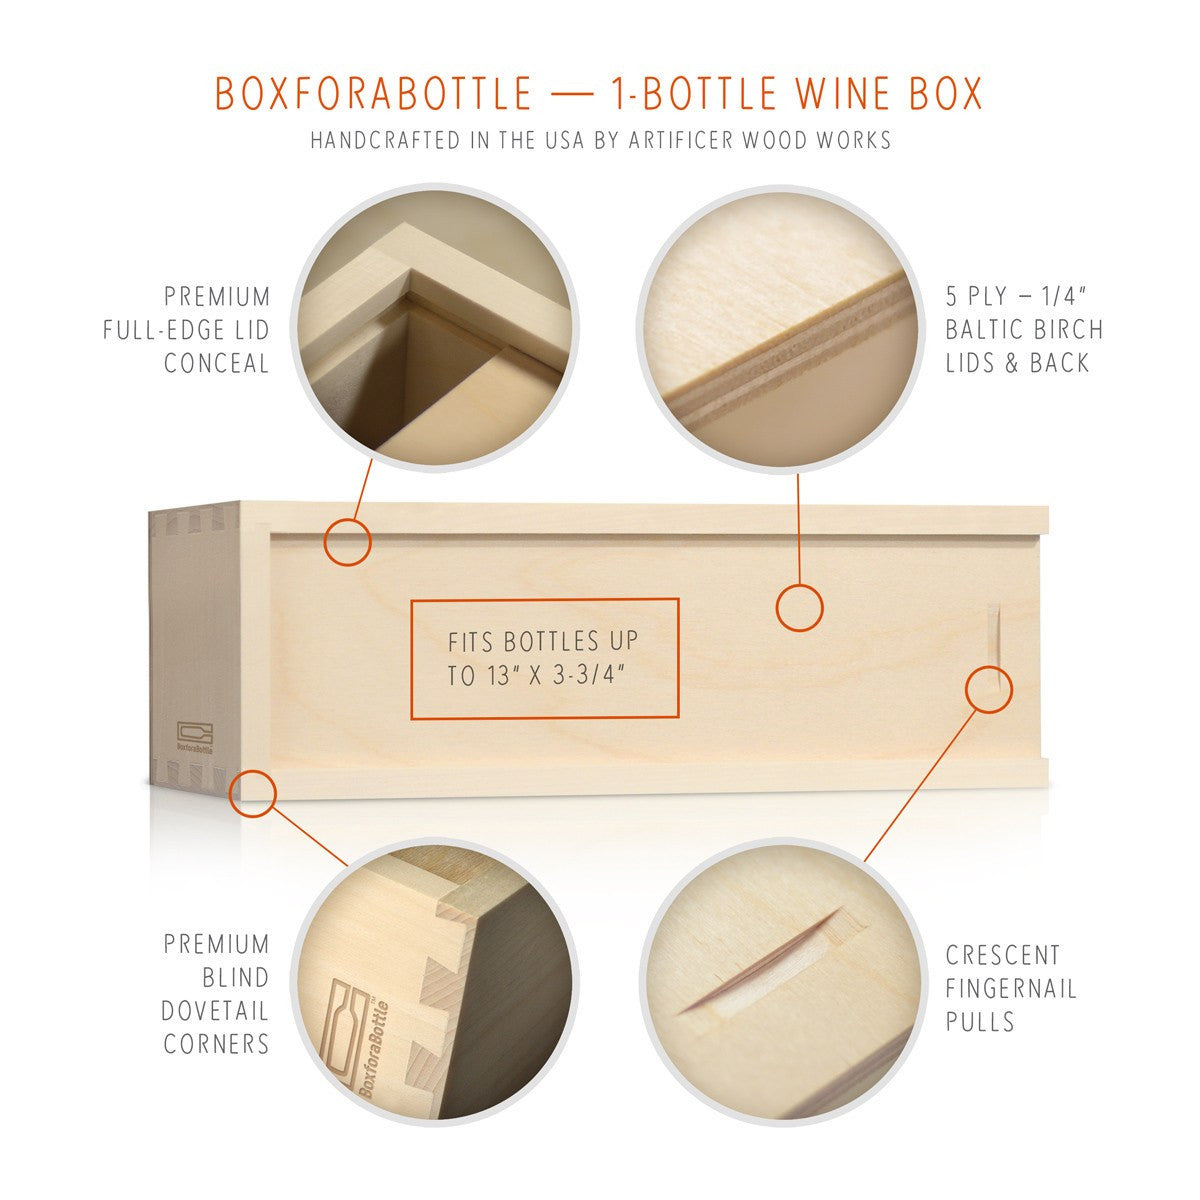 Wise Son - Wine Box for Dad